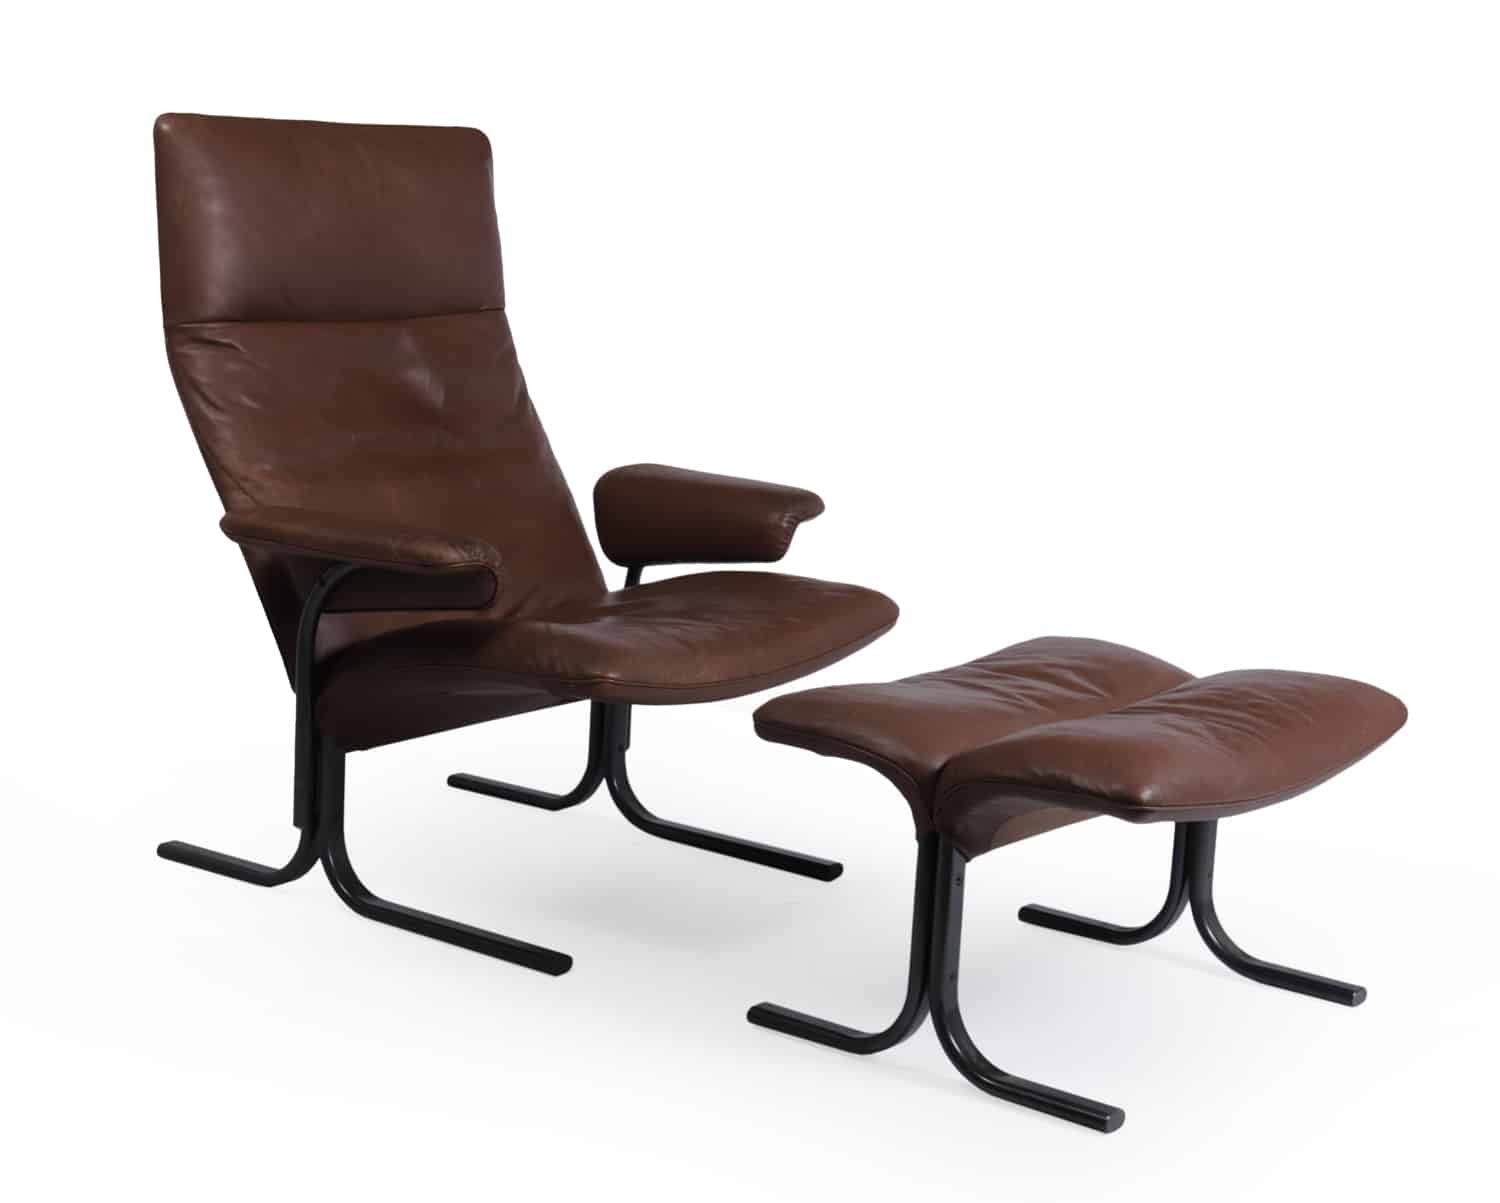 De Sede Lounge Chair Model DS 2030 – The Furniture Rooms